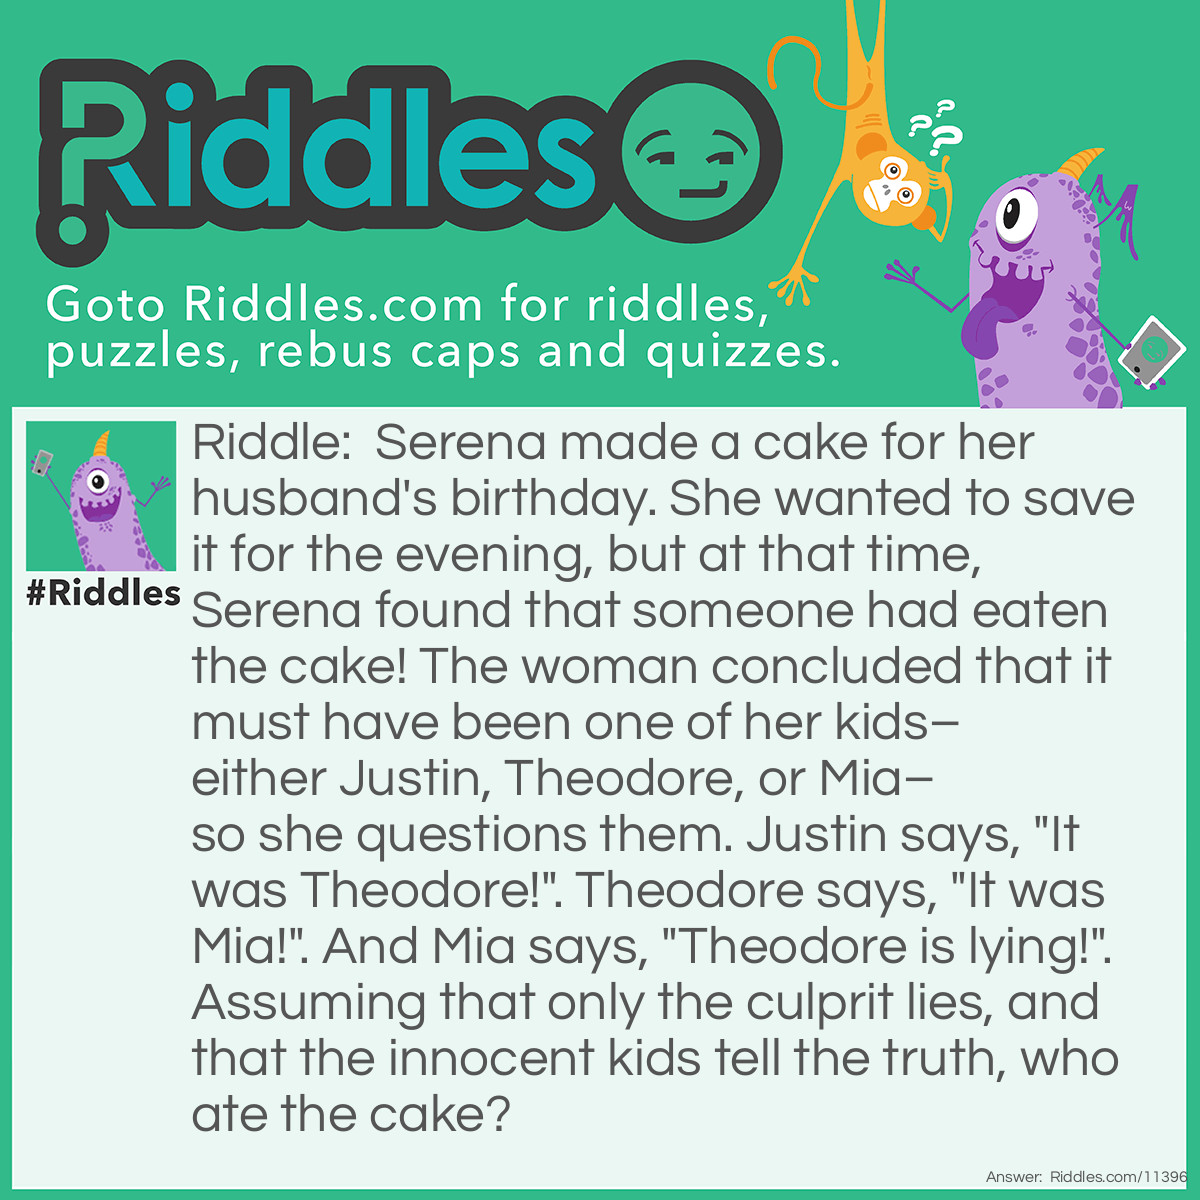 Riddle: Serena made a cake for her husband's birthday. She wanted to save it for the evening, but at that time, Serena found that someone had eaten the cake! The woman concluded that it must have been one of her kids–either Justin, Theodore, or Mia–so she questions them. Justin says, "It was Theodore!". Theodore says, "It was Mia!". And Mia says, "Theodore is lying!". Assuming that only the culprit lies, and that the innocent kids tell the truth, who ate the cake? Answer: Theodore ate the cake. If Justin was the thief, then he and Theodore would be lying, and Mia would be telling the truth, which contradicts the conditions. And if Mia was the thief, then she and Justin would be lying, and Theodore would be telling the truth; this also goes against the rules. Therefore, Justin and Mia are telling the truth, and Theodore is lying, which means that Theodore is the thief.